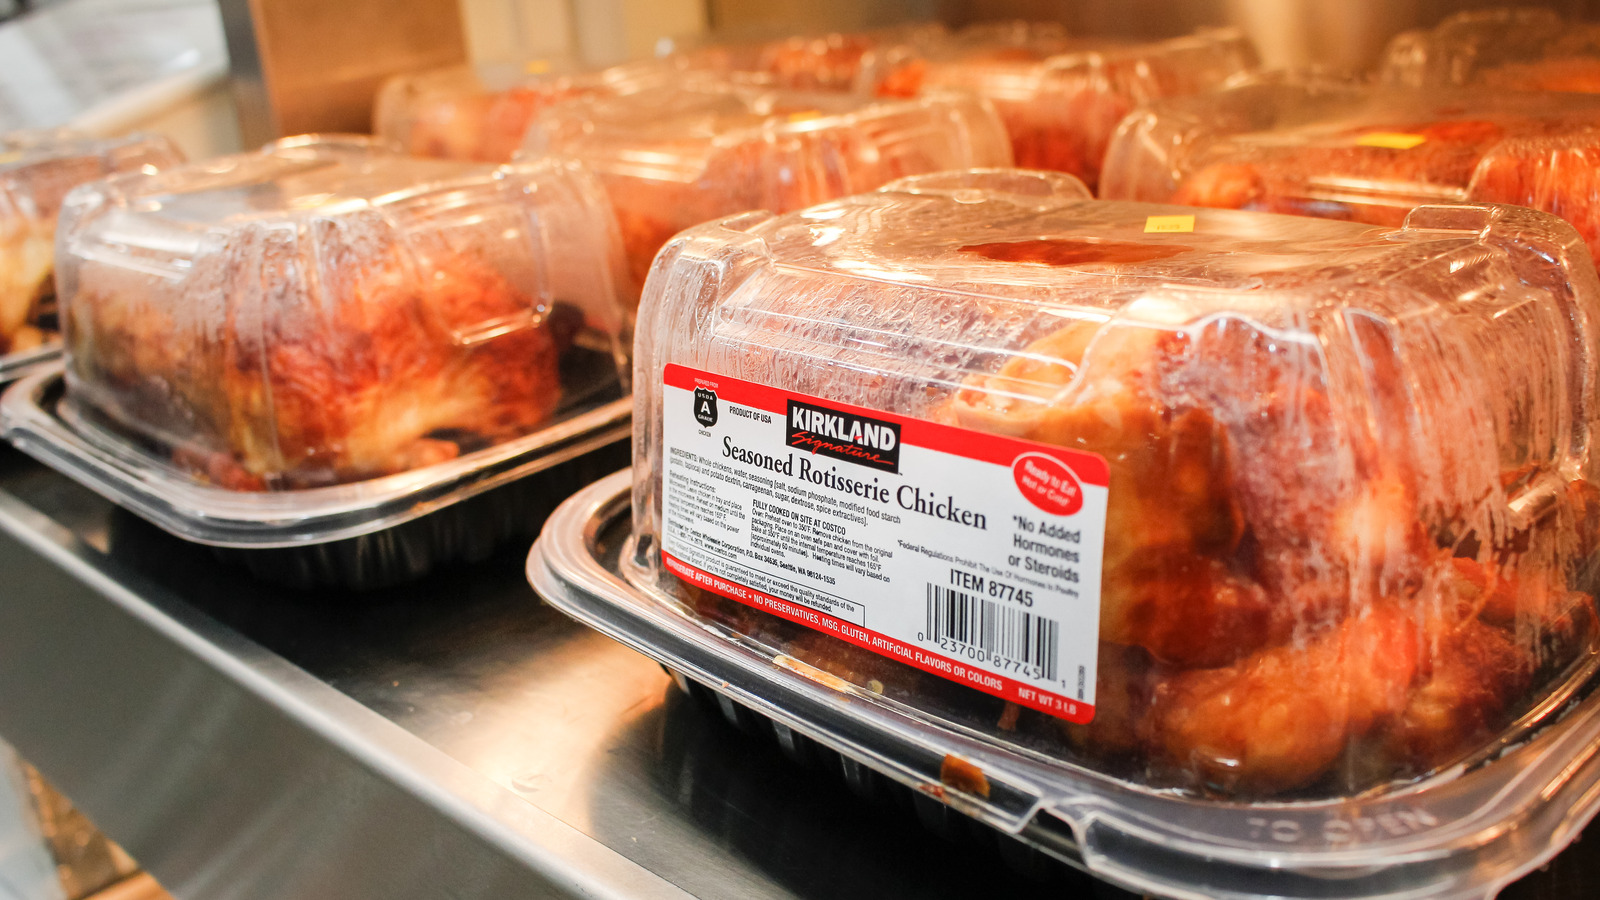 Costco's Spicy New Rotisserie Chicken Hack is Setting the Internet on Fire  - Parade